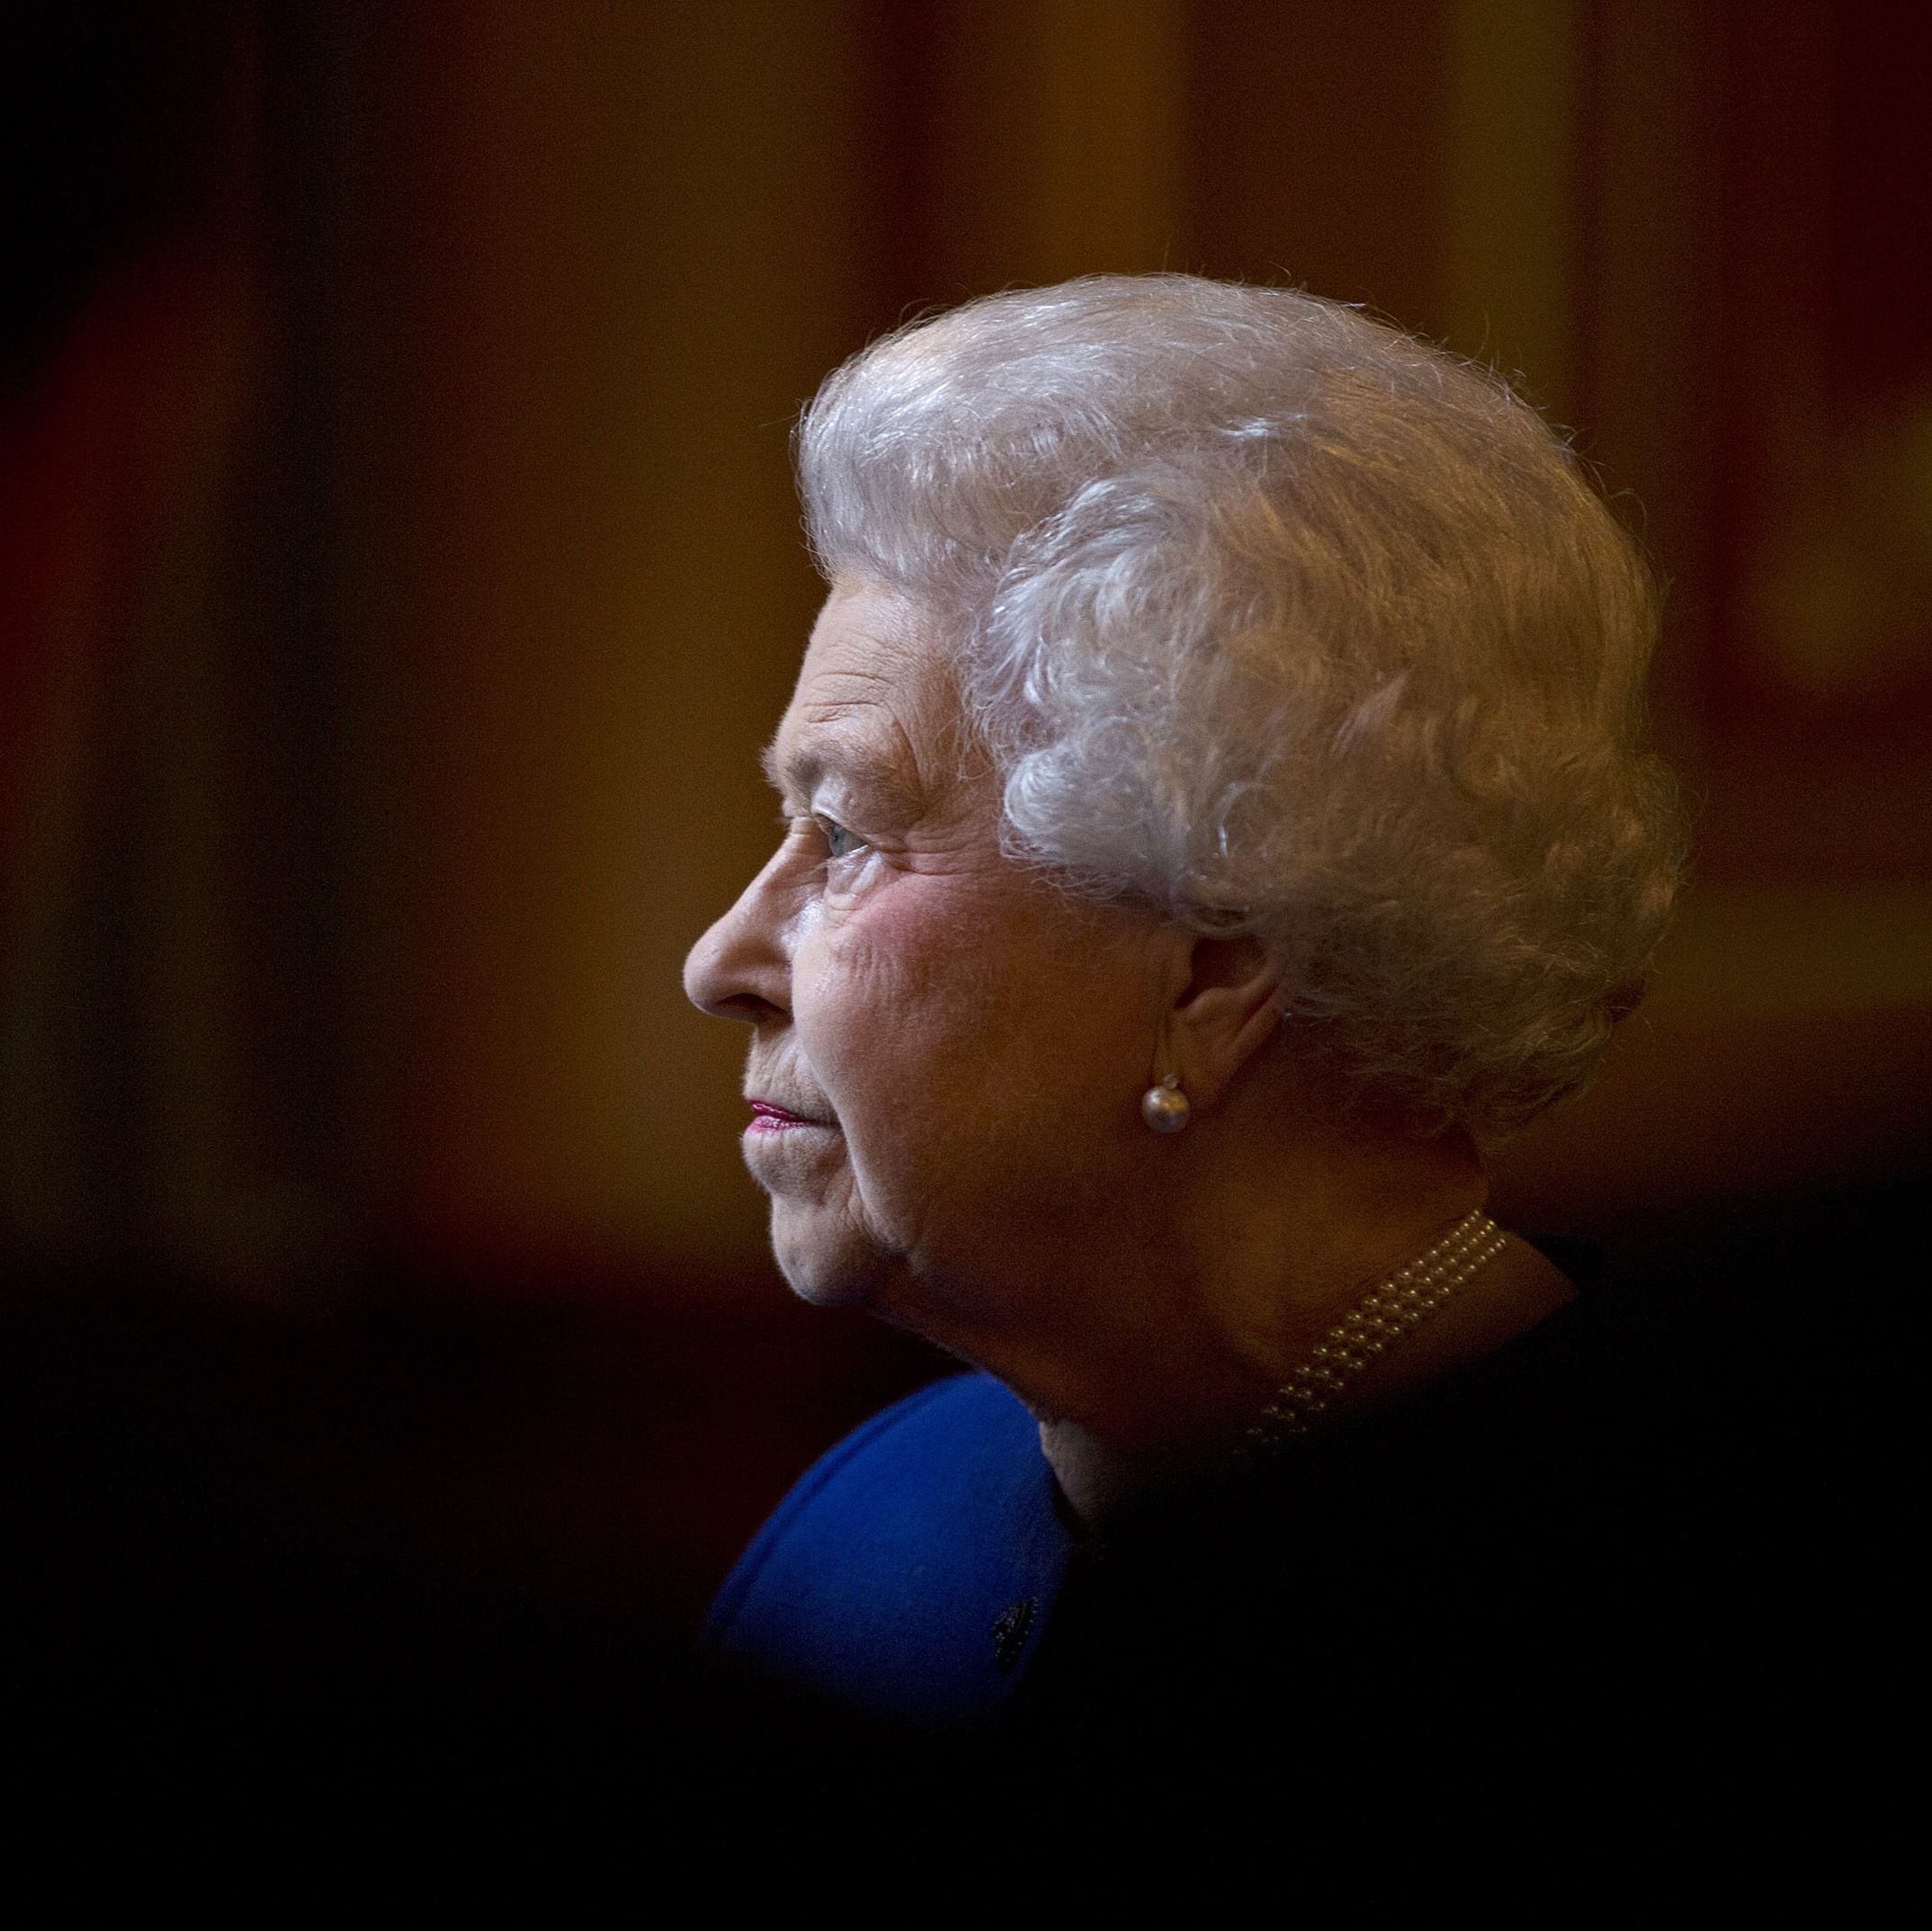 Queen Elizabeth Pledged That Hers Was a Job for Life, and She Meant It